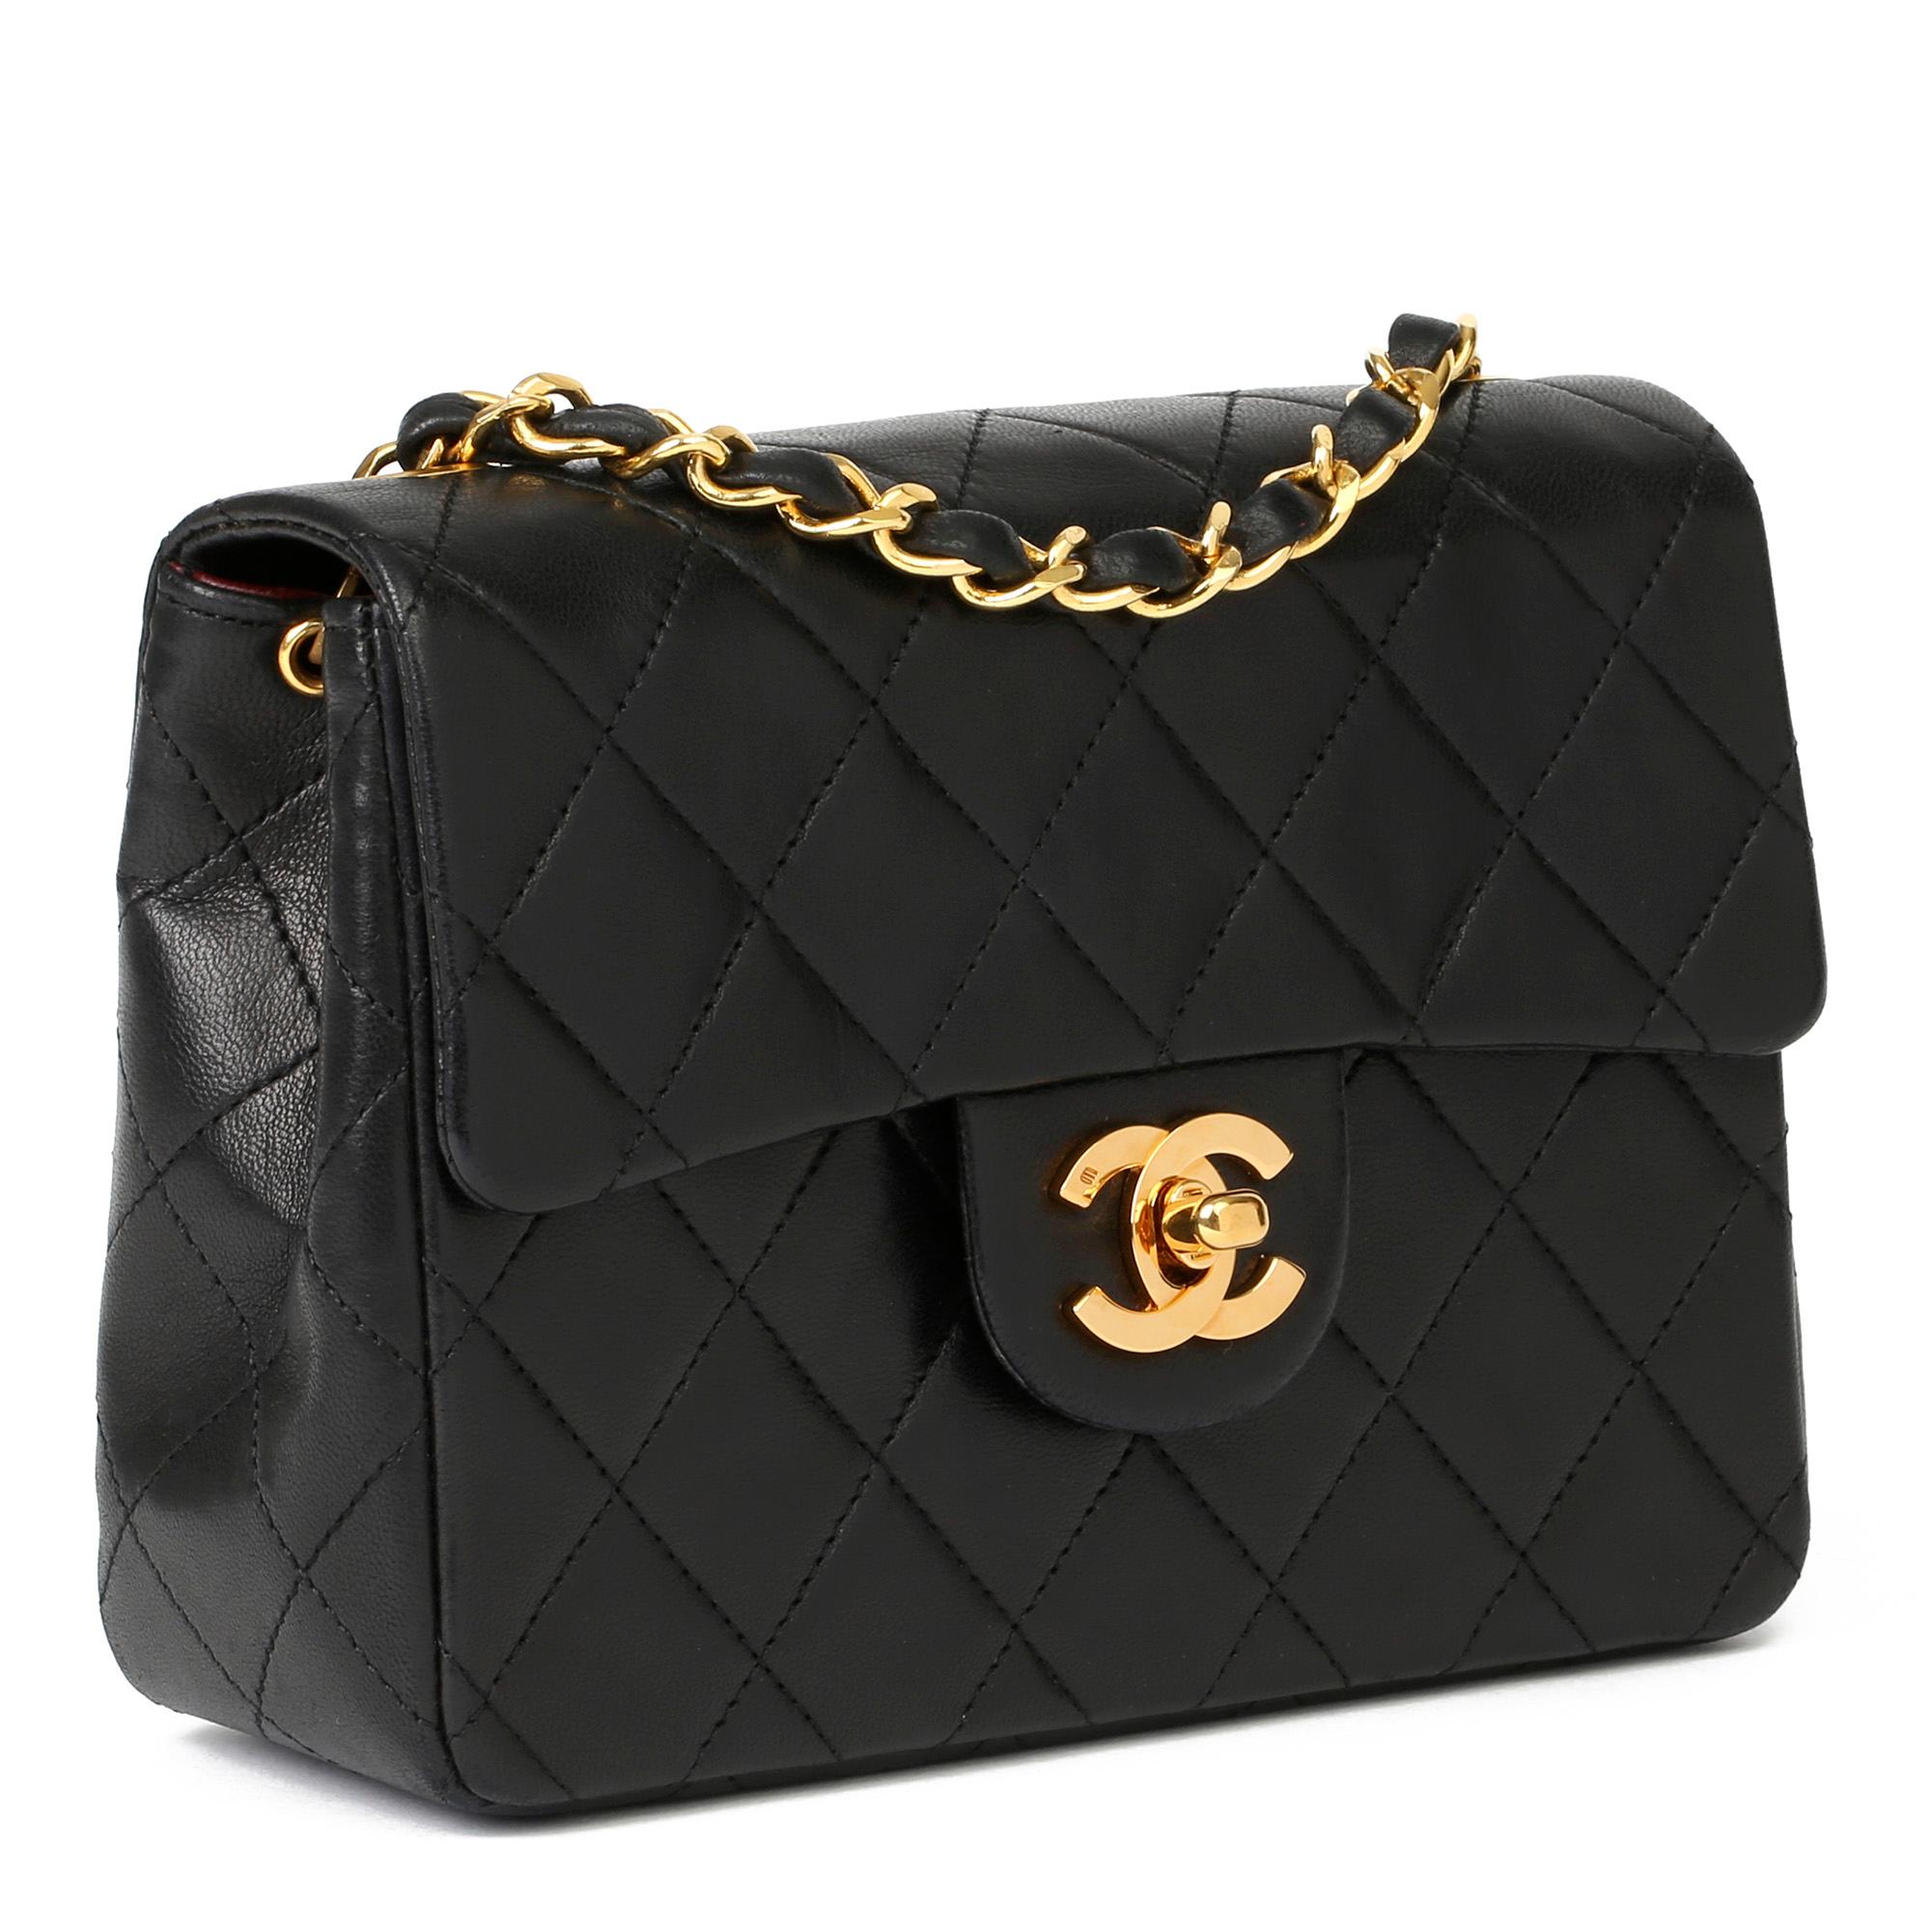 CHANEL
Black Quilted Lambskin Vintage Mini Flap Bag 

Xupes Reference: HB3953
Serial Number: 1198622
Age (Circa): 1989
Accompanied By: Chanel Dust Bag, Box
Authenticity Details: Serial Sticker (Made in France) 
Gender: Ladies
Type: Shoulder,